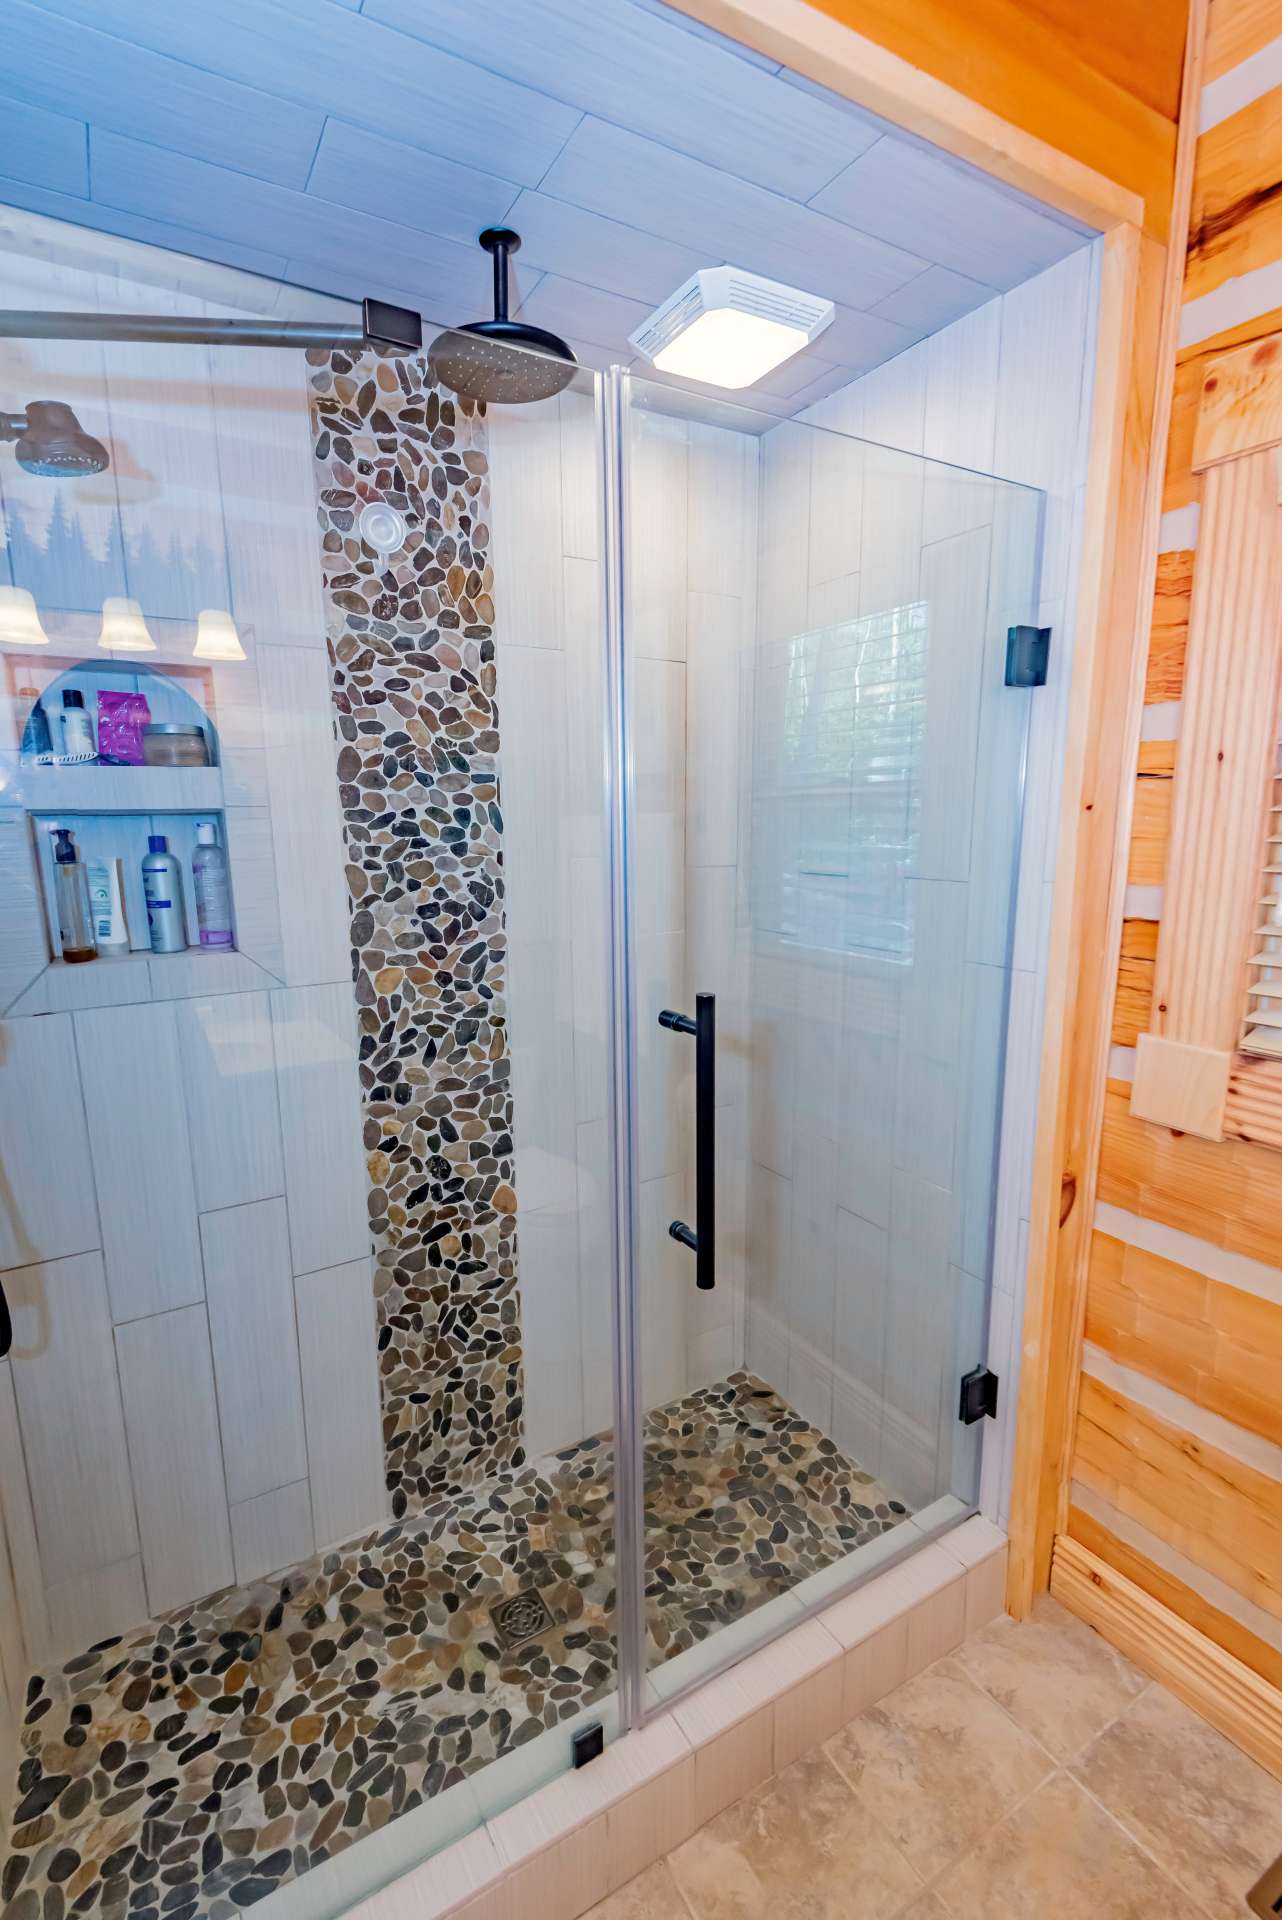 You will love the walk-in tiled shower in the master bath.